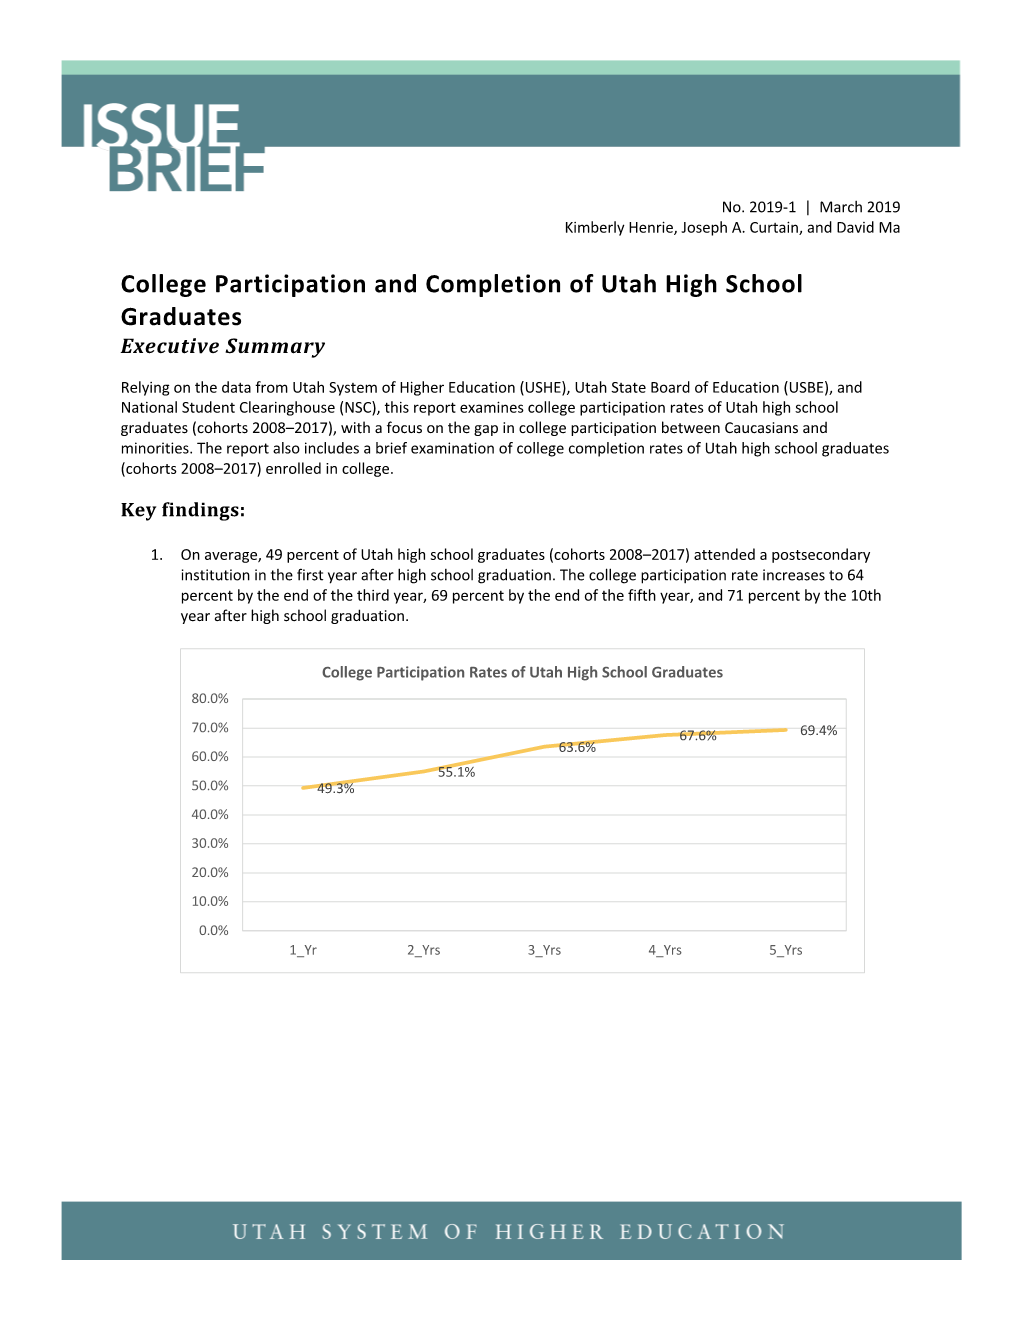 College Participation and Completion of Utah High School Graduates Executive Summary